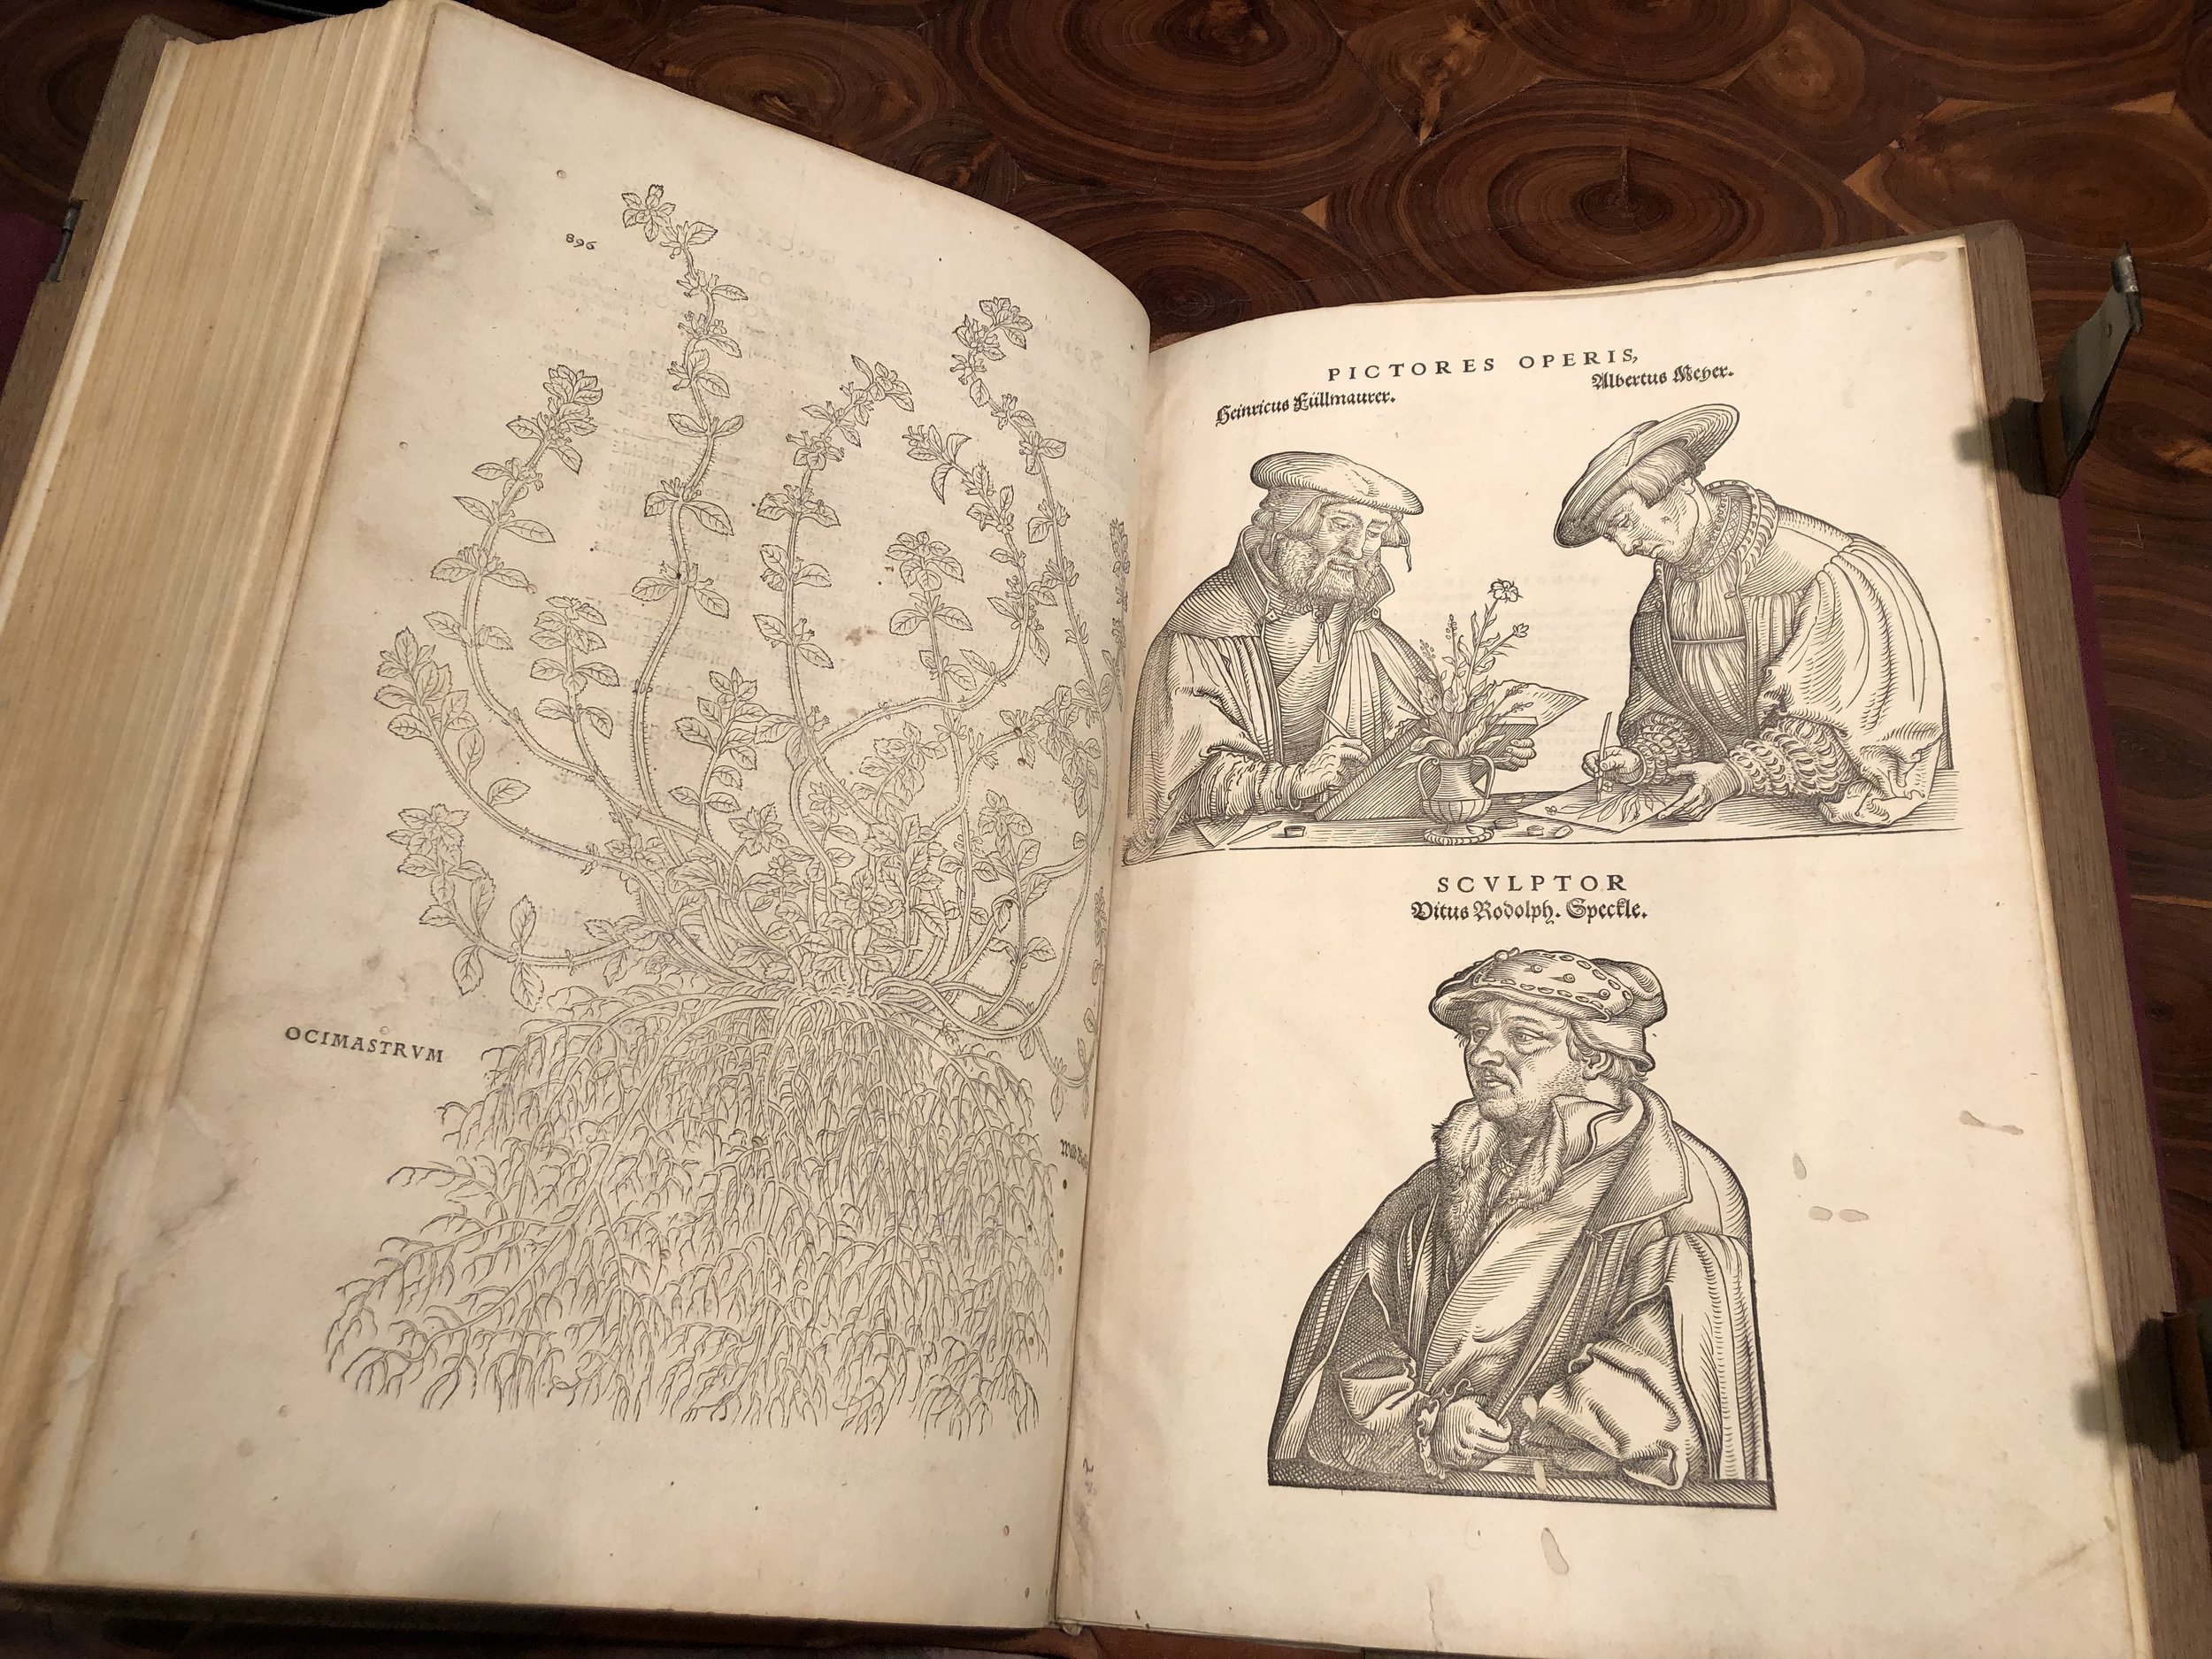 A book about Botany